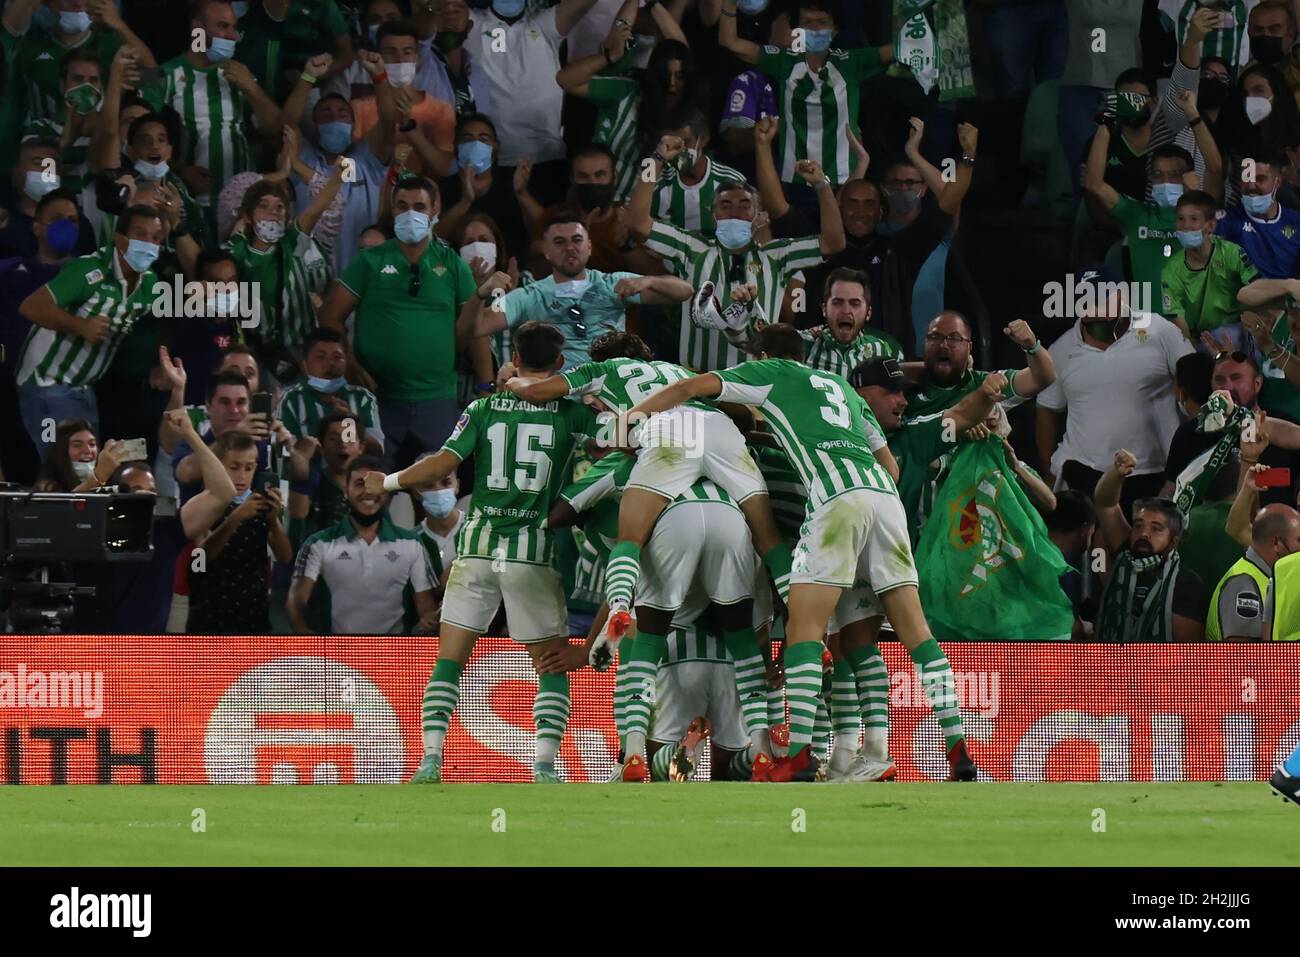 Seville, Spain. 21st Oct, 2021. Players of Real Betis celebrate a goal during the UEFA Europa League Group G stage match between Real Betis and Bayern Leverkusen at Benito Villamarin Stadium on October 21, 2021 in Seville, Spain. Credit: DAX Images/Alamy Live News Stock Photo